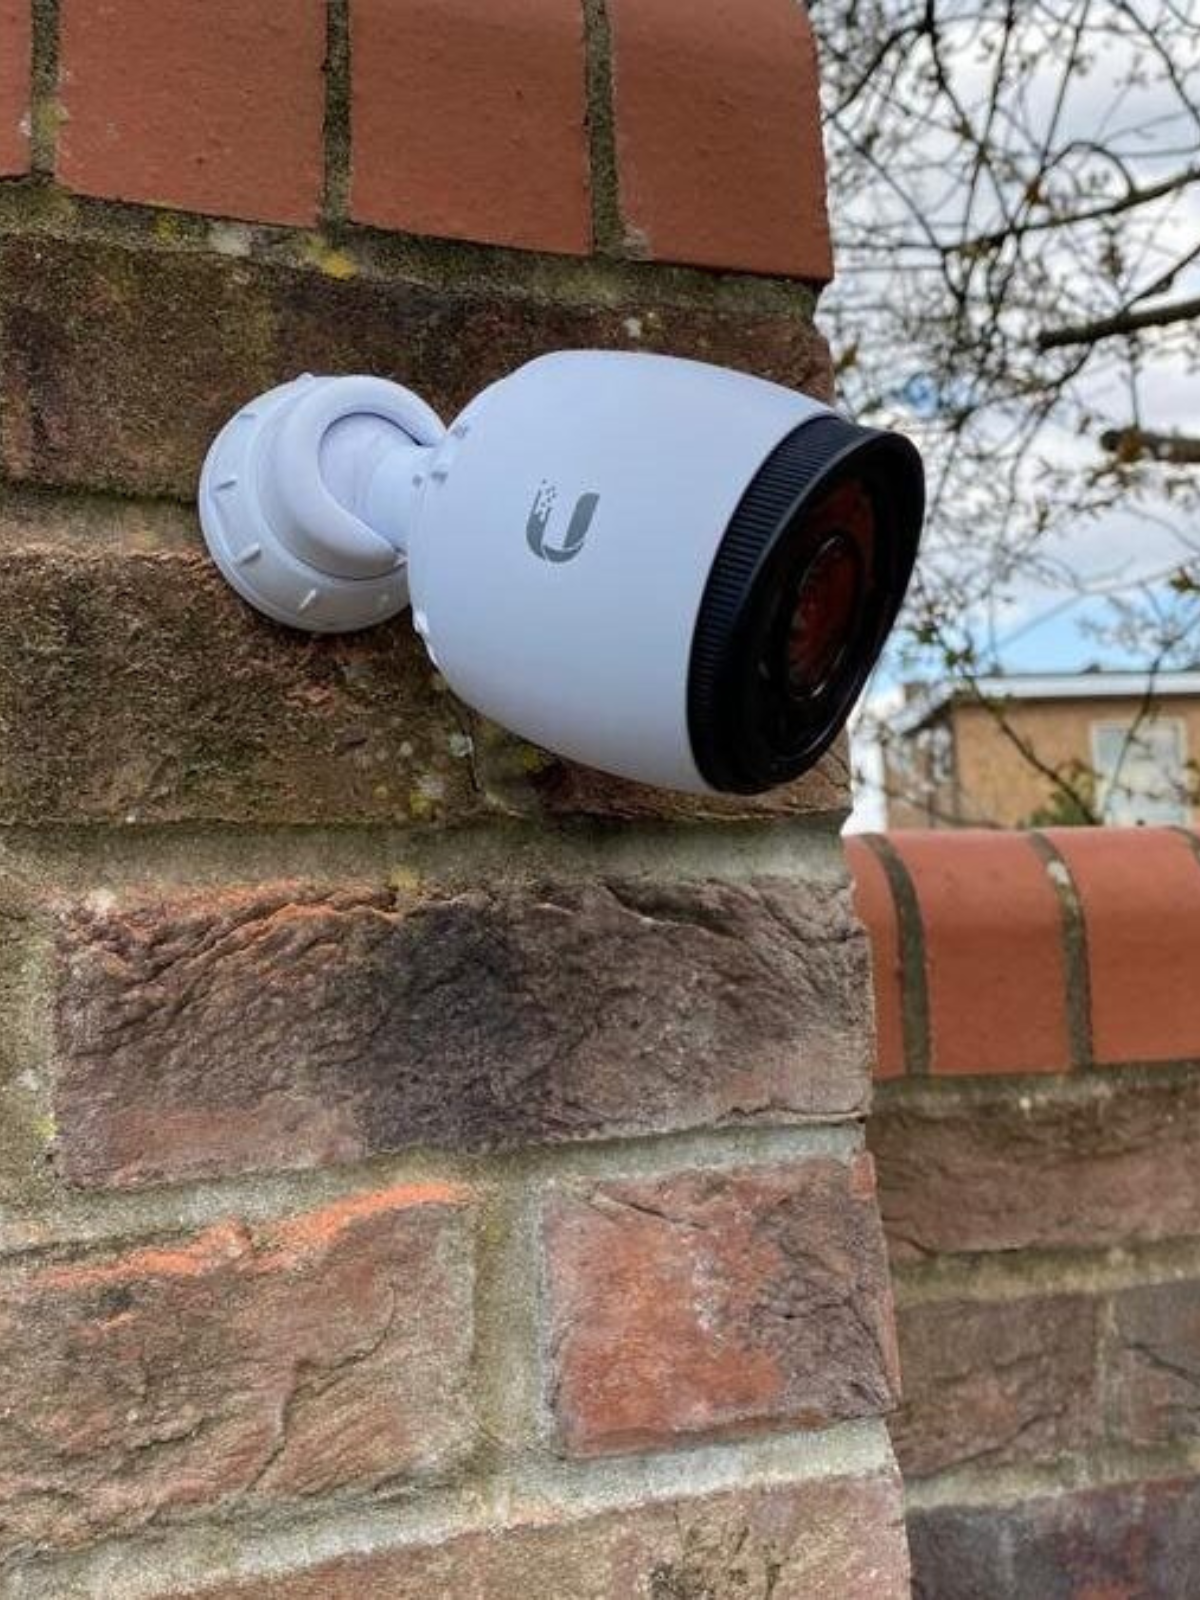 UniFi Security Camera mounted on a brick wall